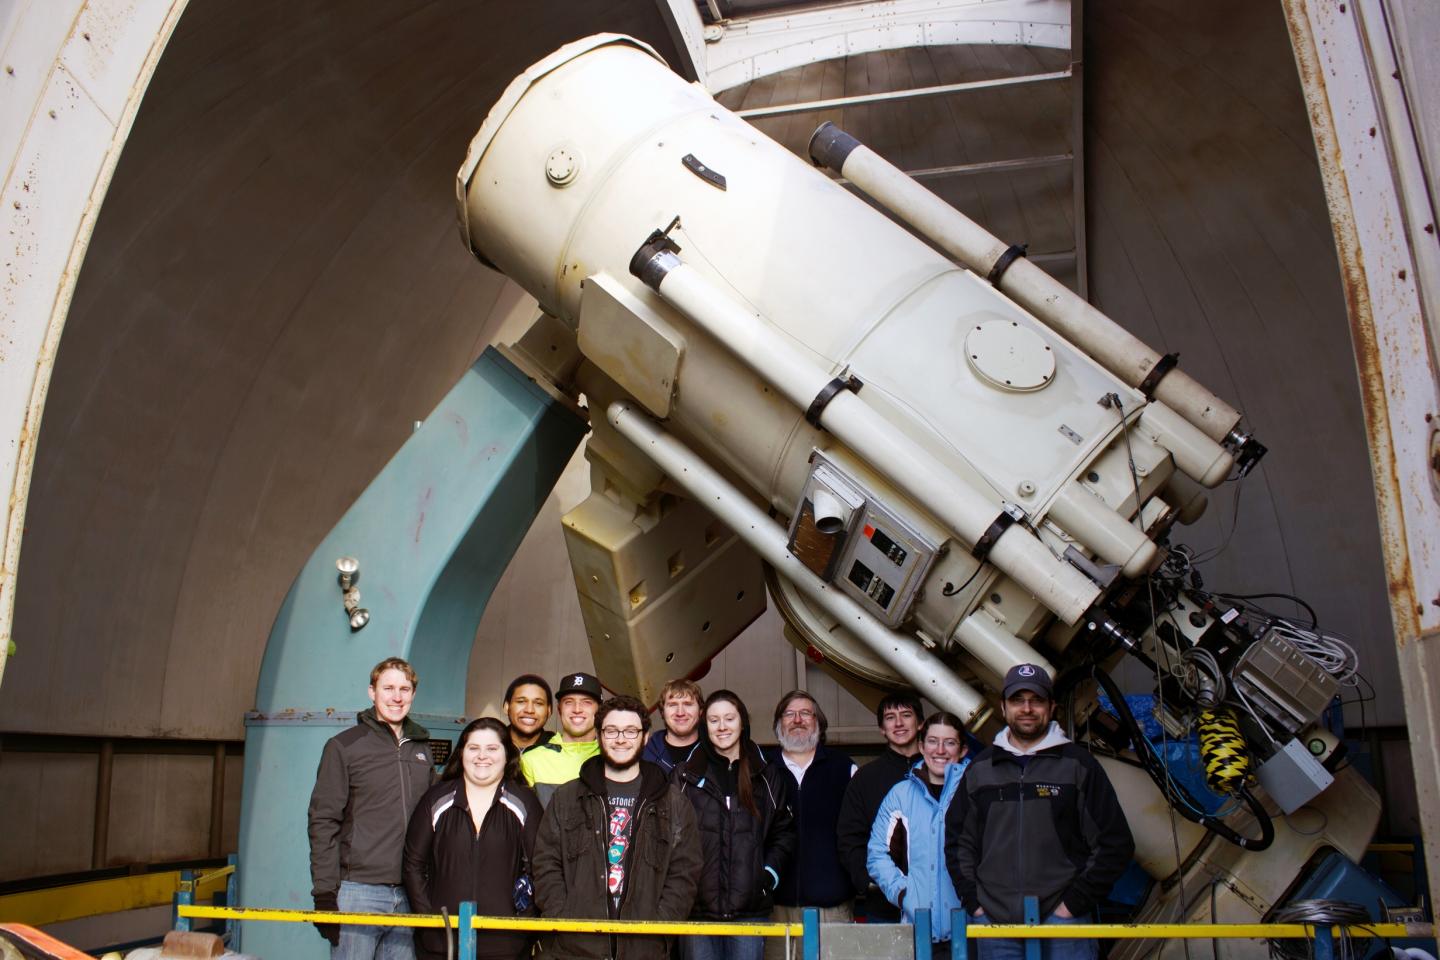 University of Toledo Observing Team Poses with the HPOL